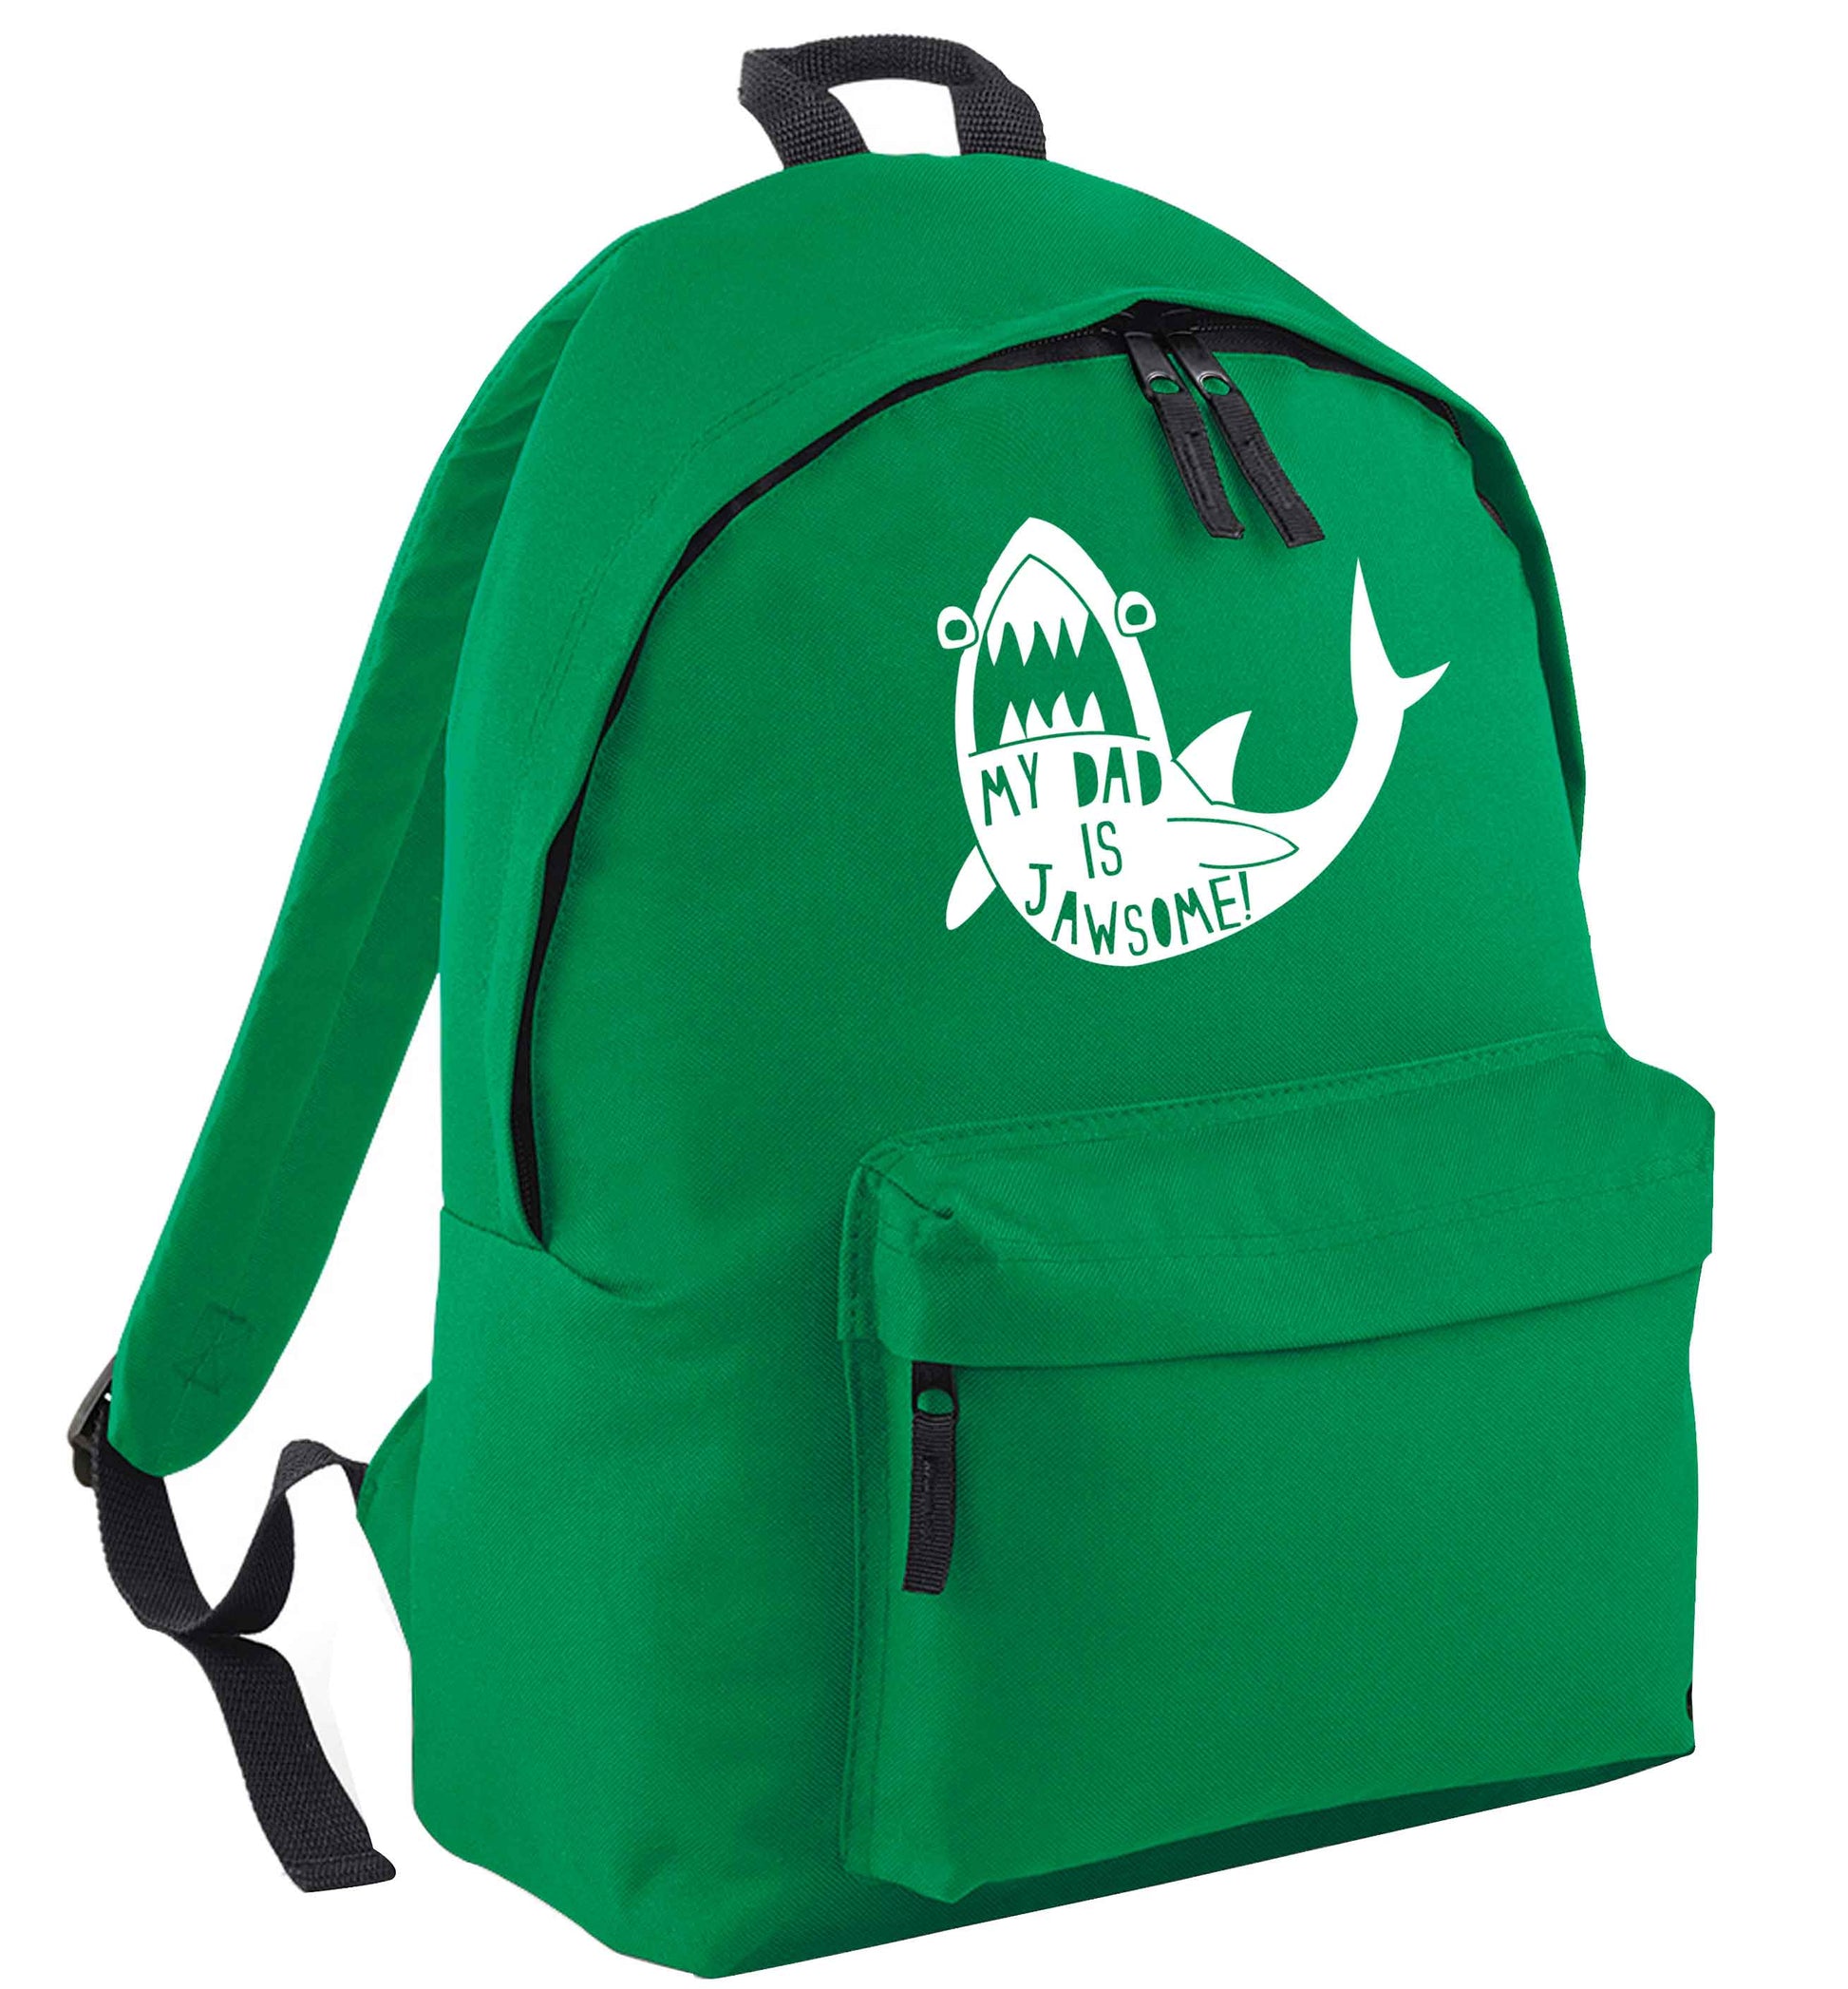 My Dad is jawsome green adults backpack